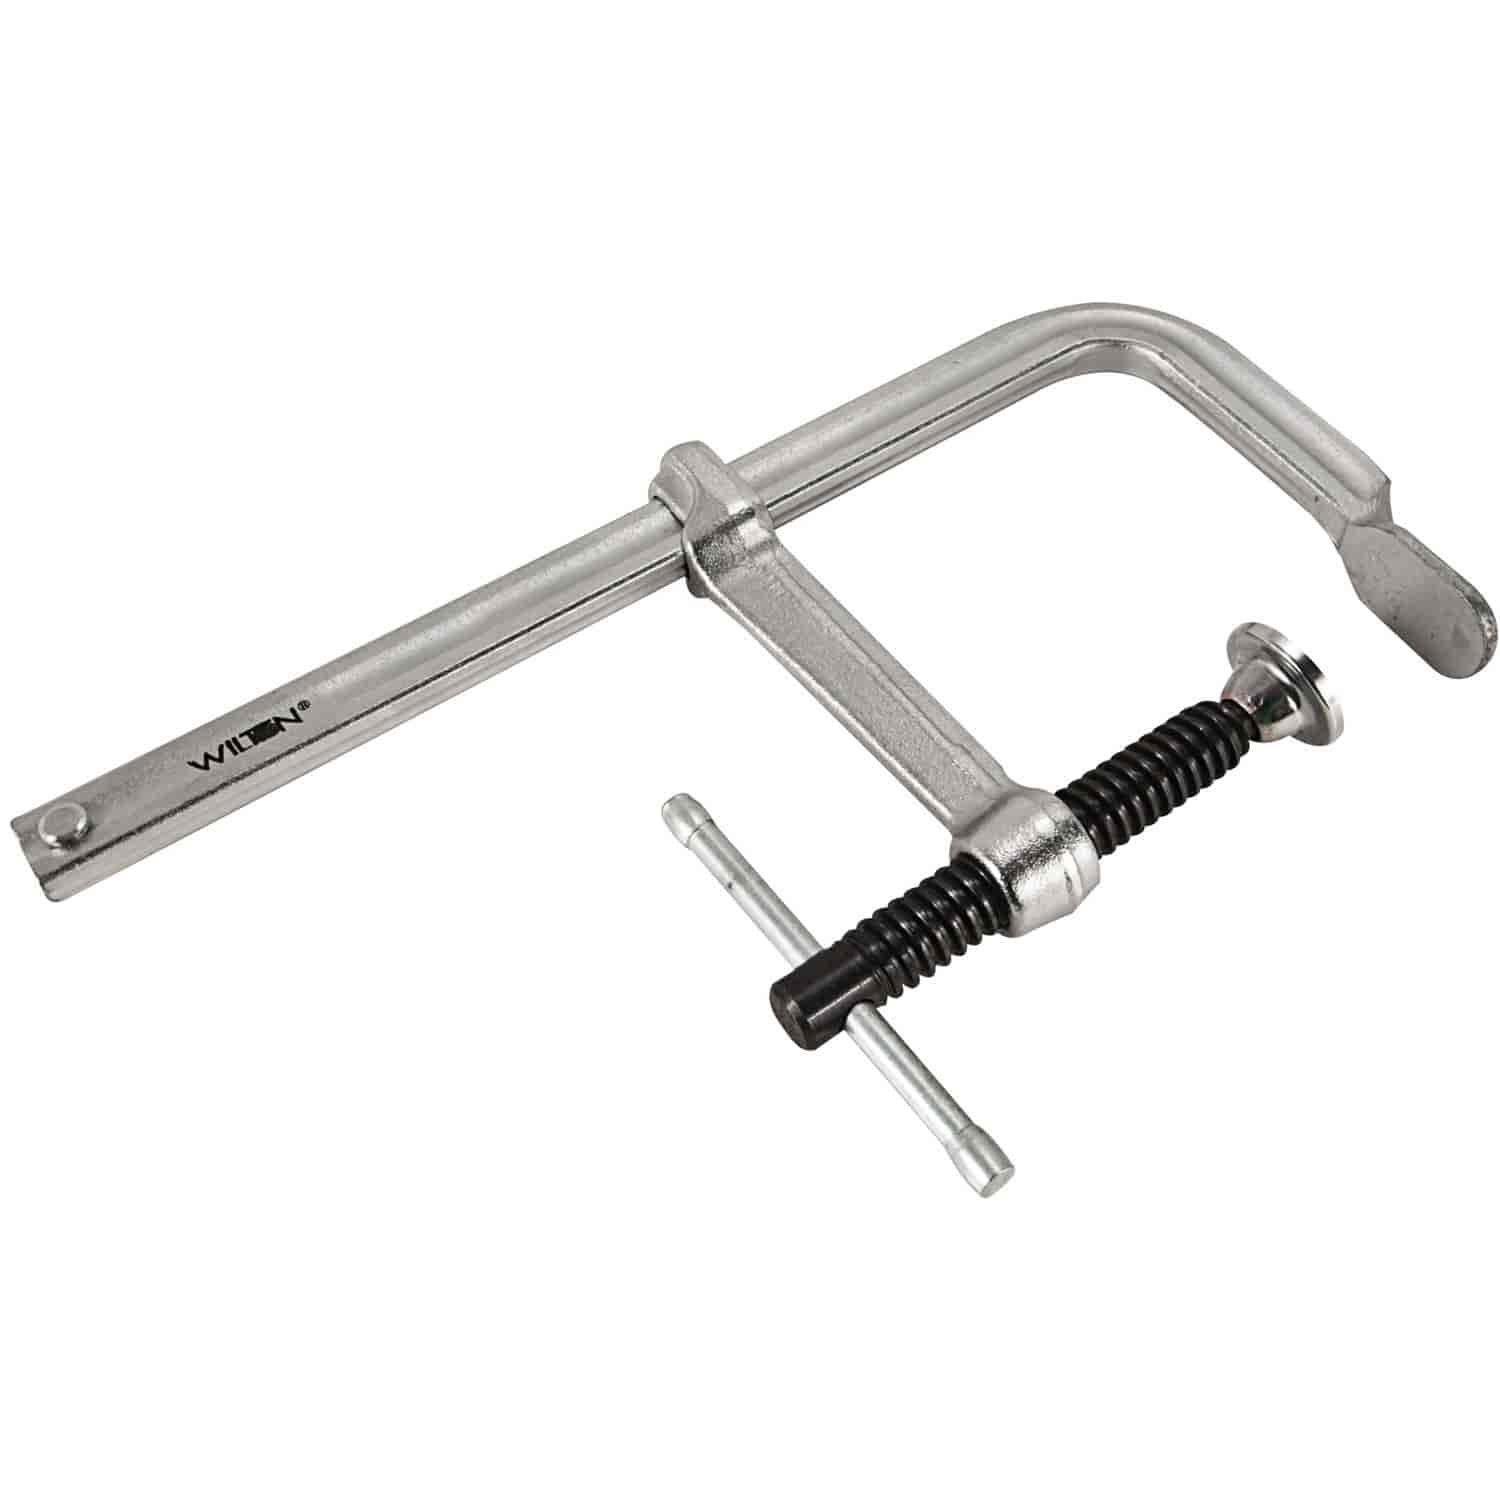 Wilton Tools 12" Classic Series F-Clamps